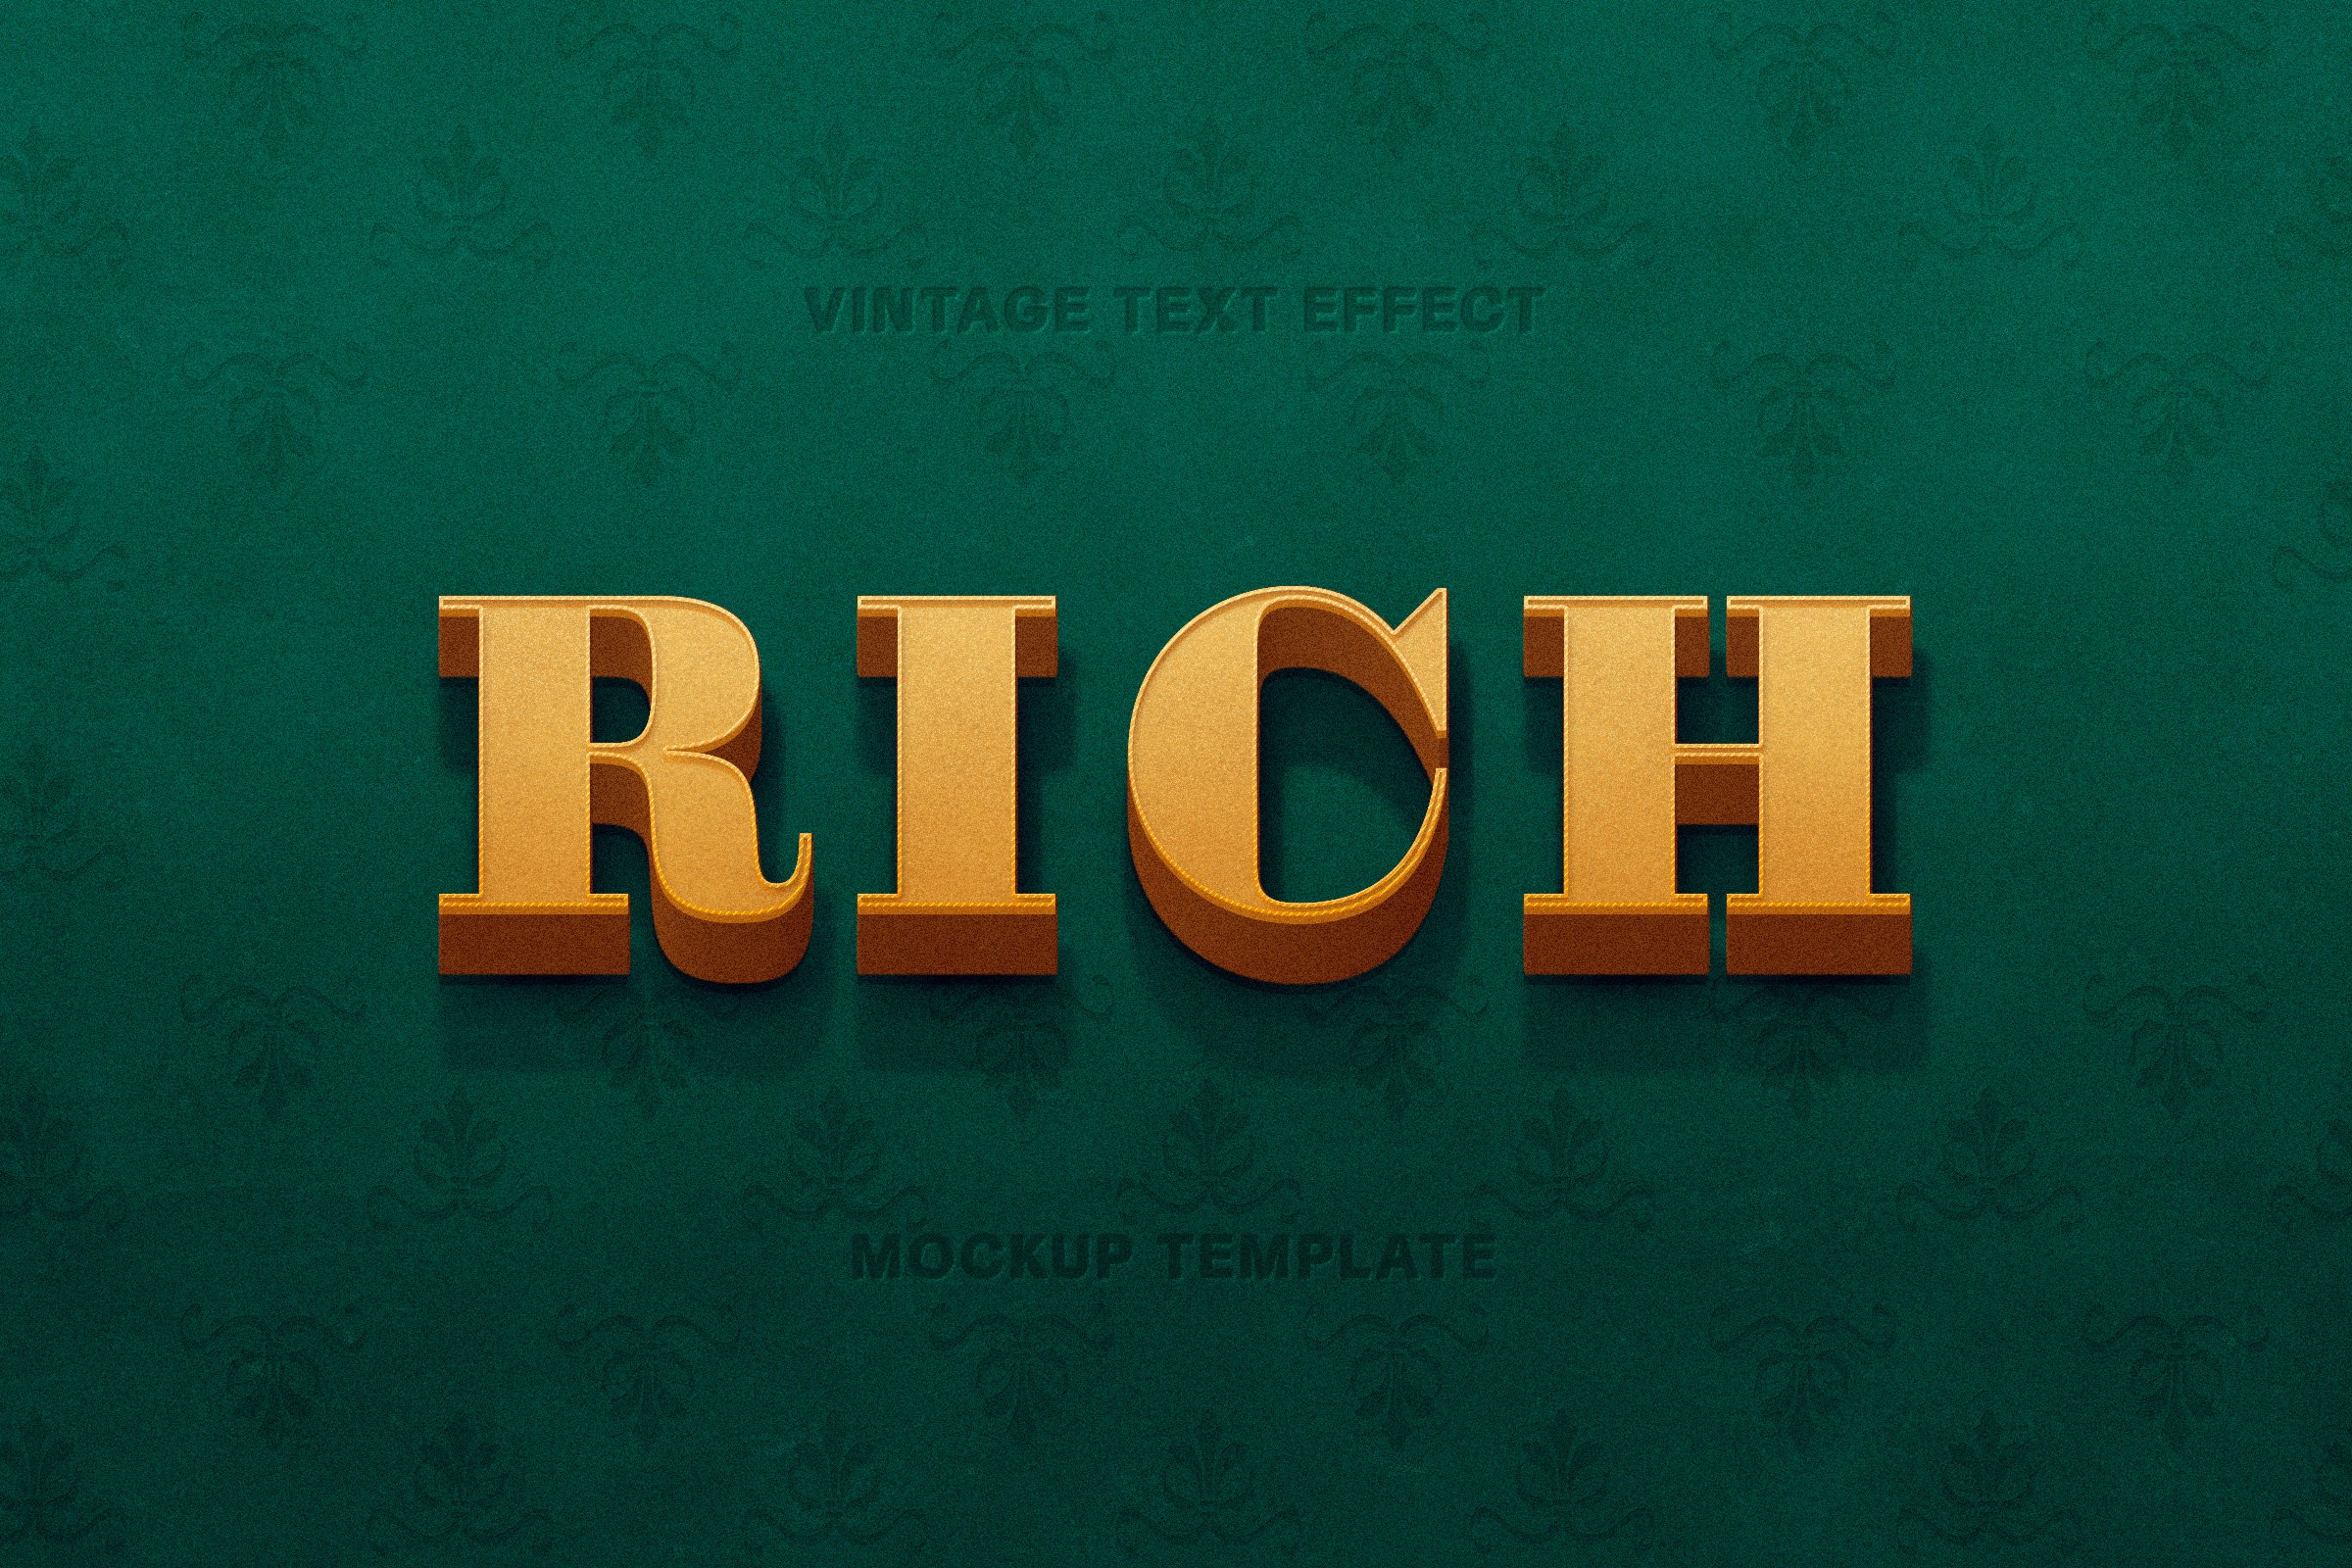 Vintage Text Effectpreview image.